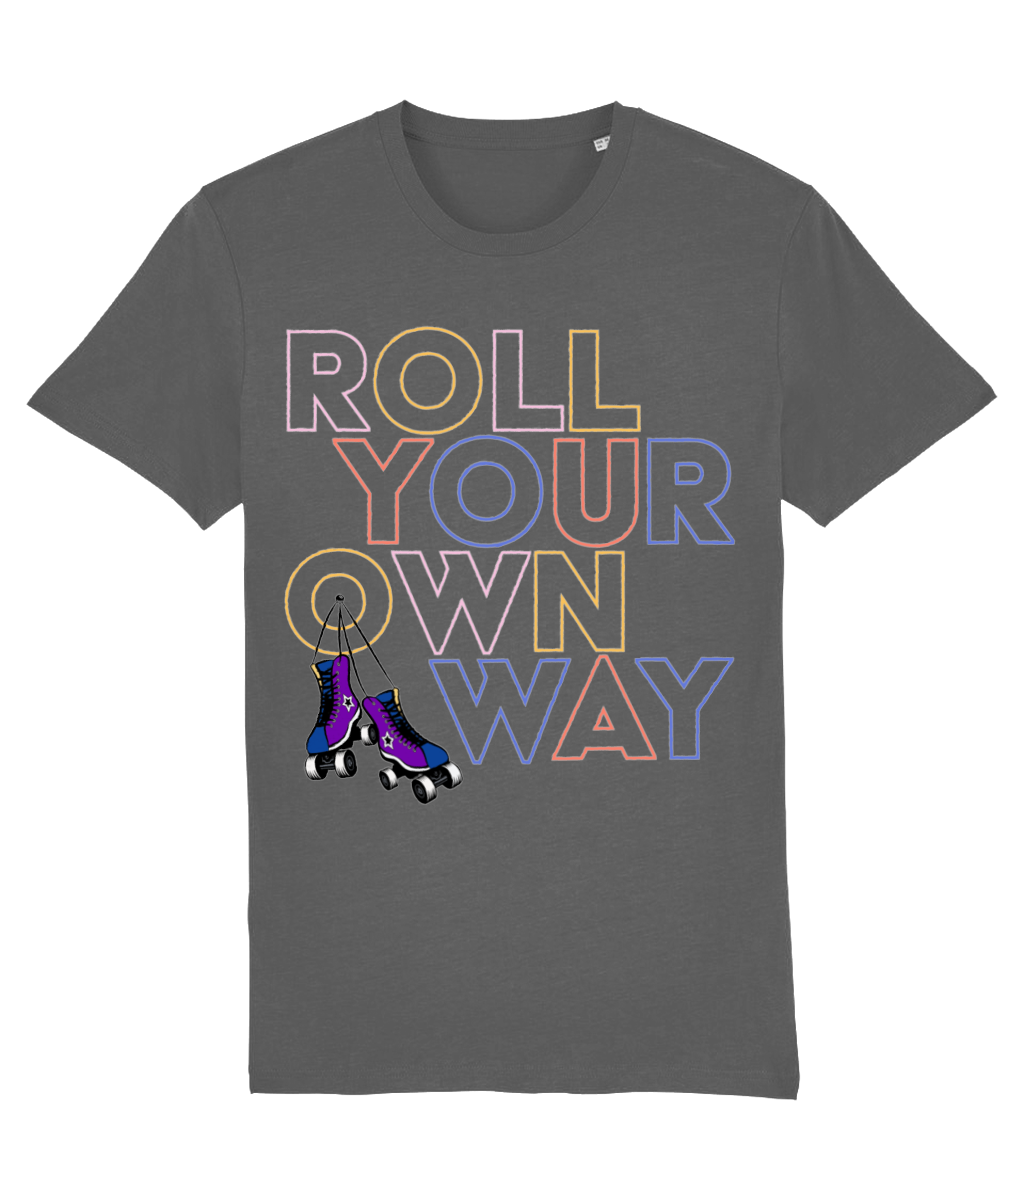 Tshirt Roll Your Own Way